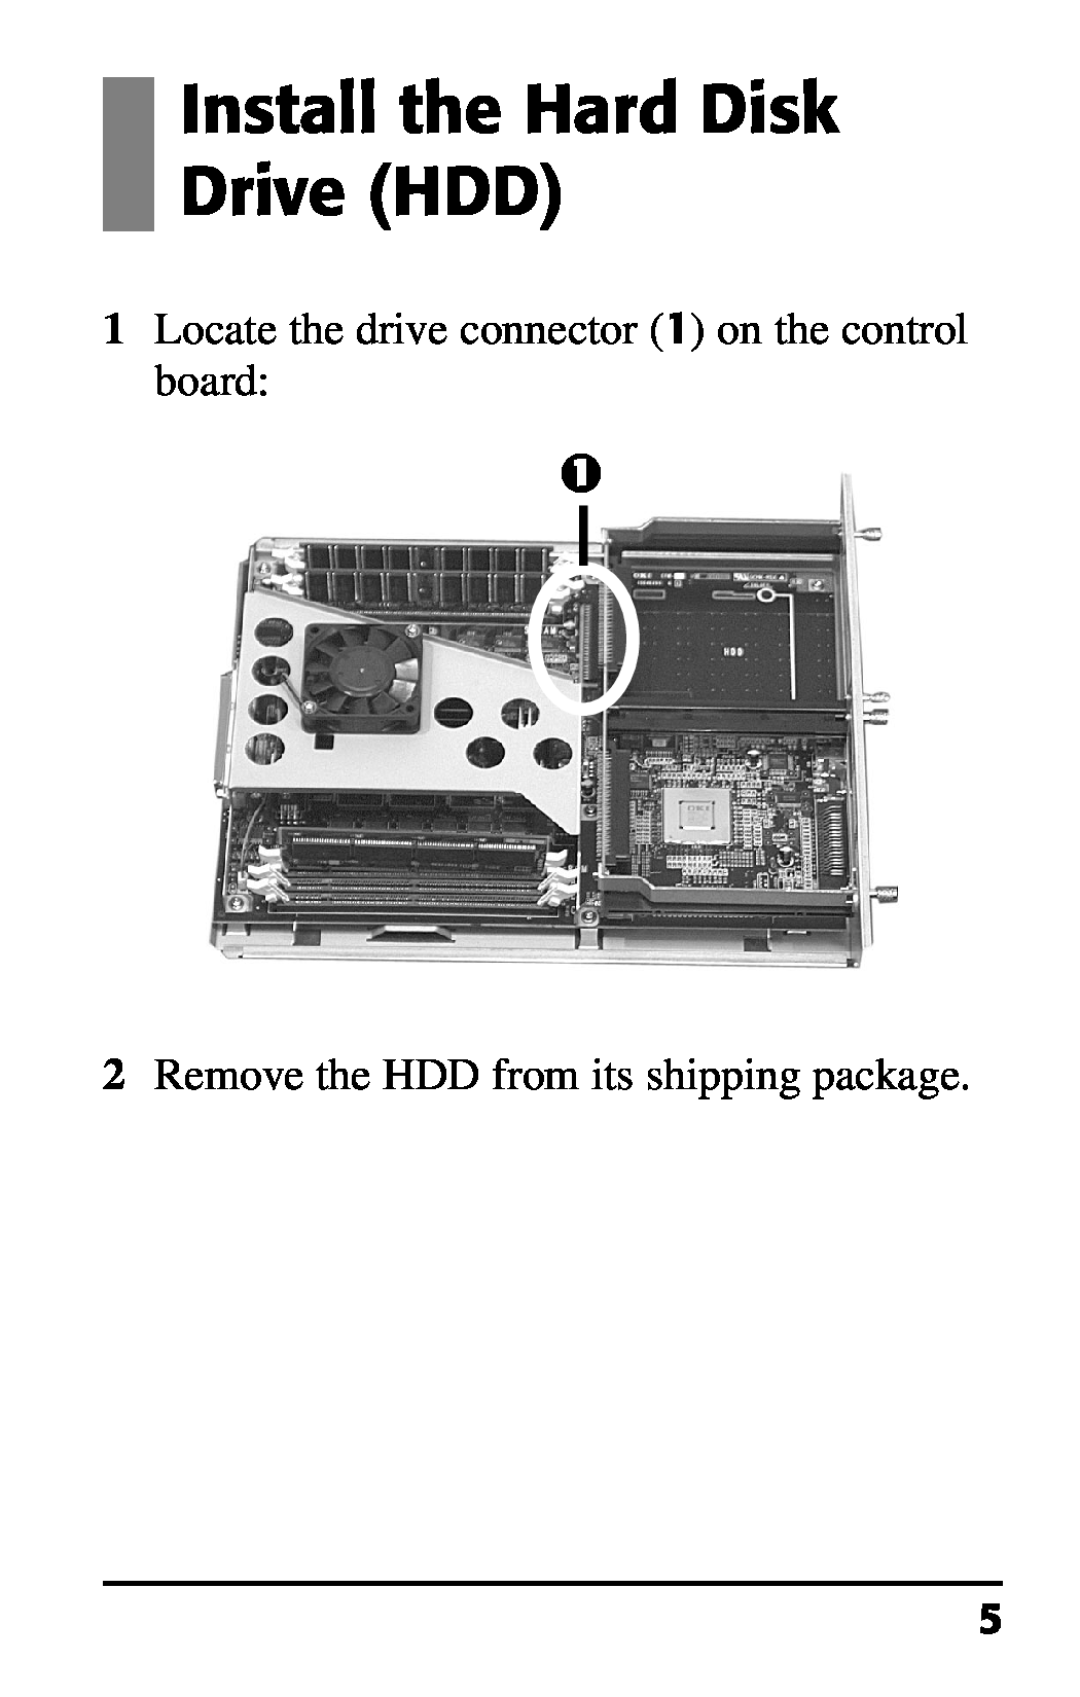 Oki 70037301 installation instructions Install the Hard Disk Drive HDD, Locate the drive connector 1 on the control board 